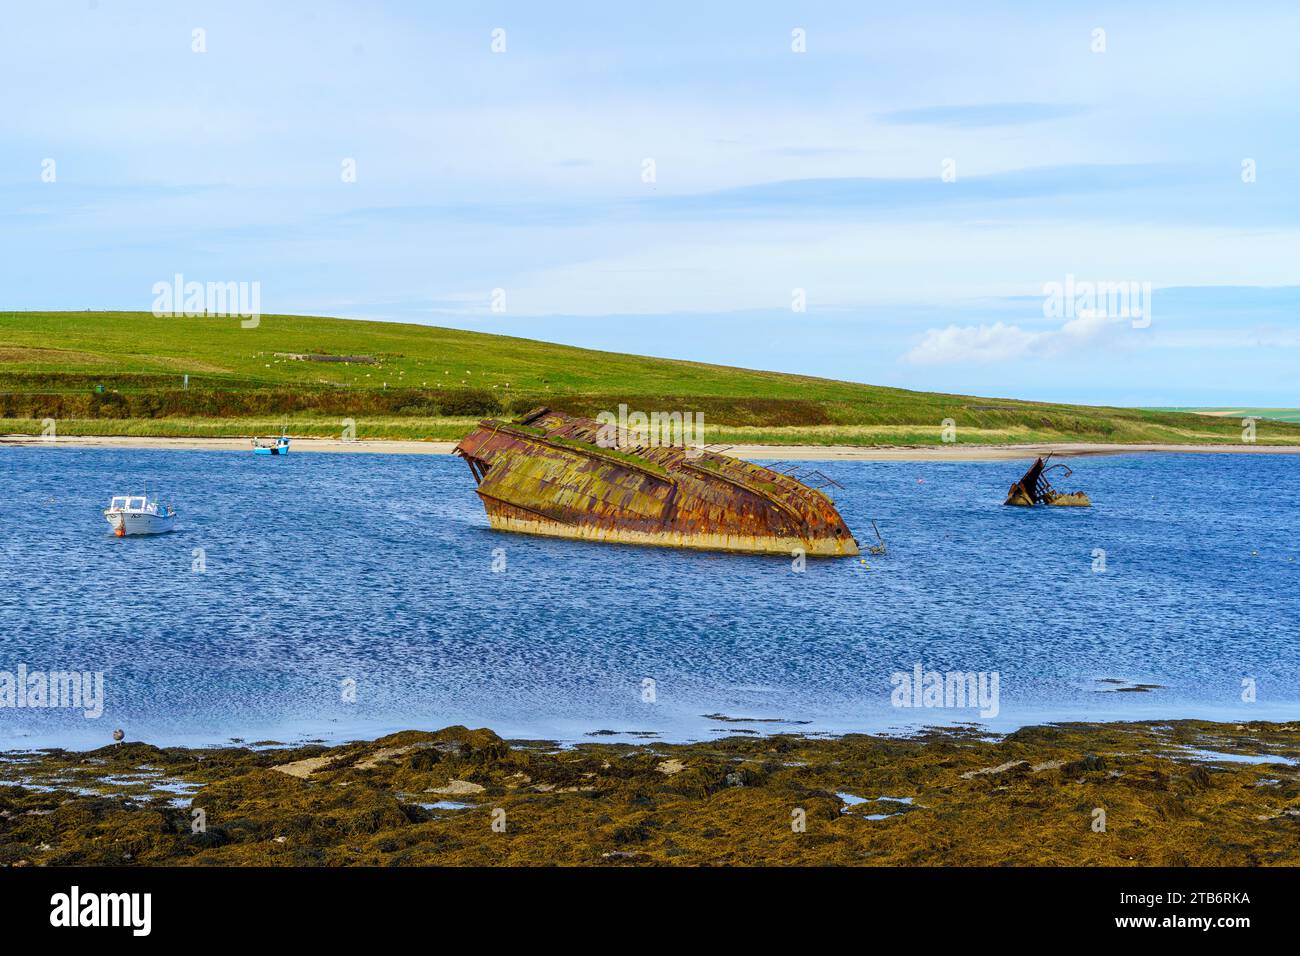 View of causeway and shipwrecks (SS Reginald Blockship), in the Orkney Islands, Scotland, UK Stock Photo